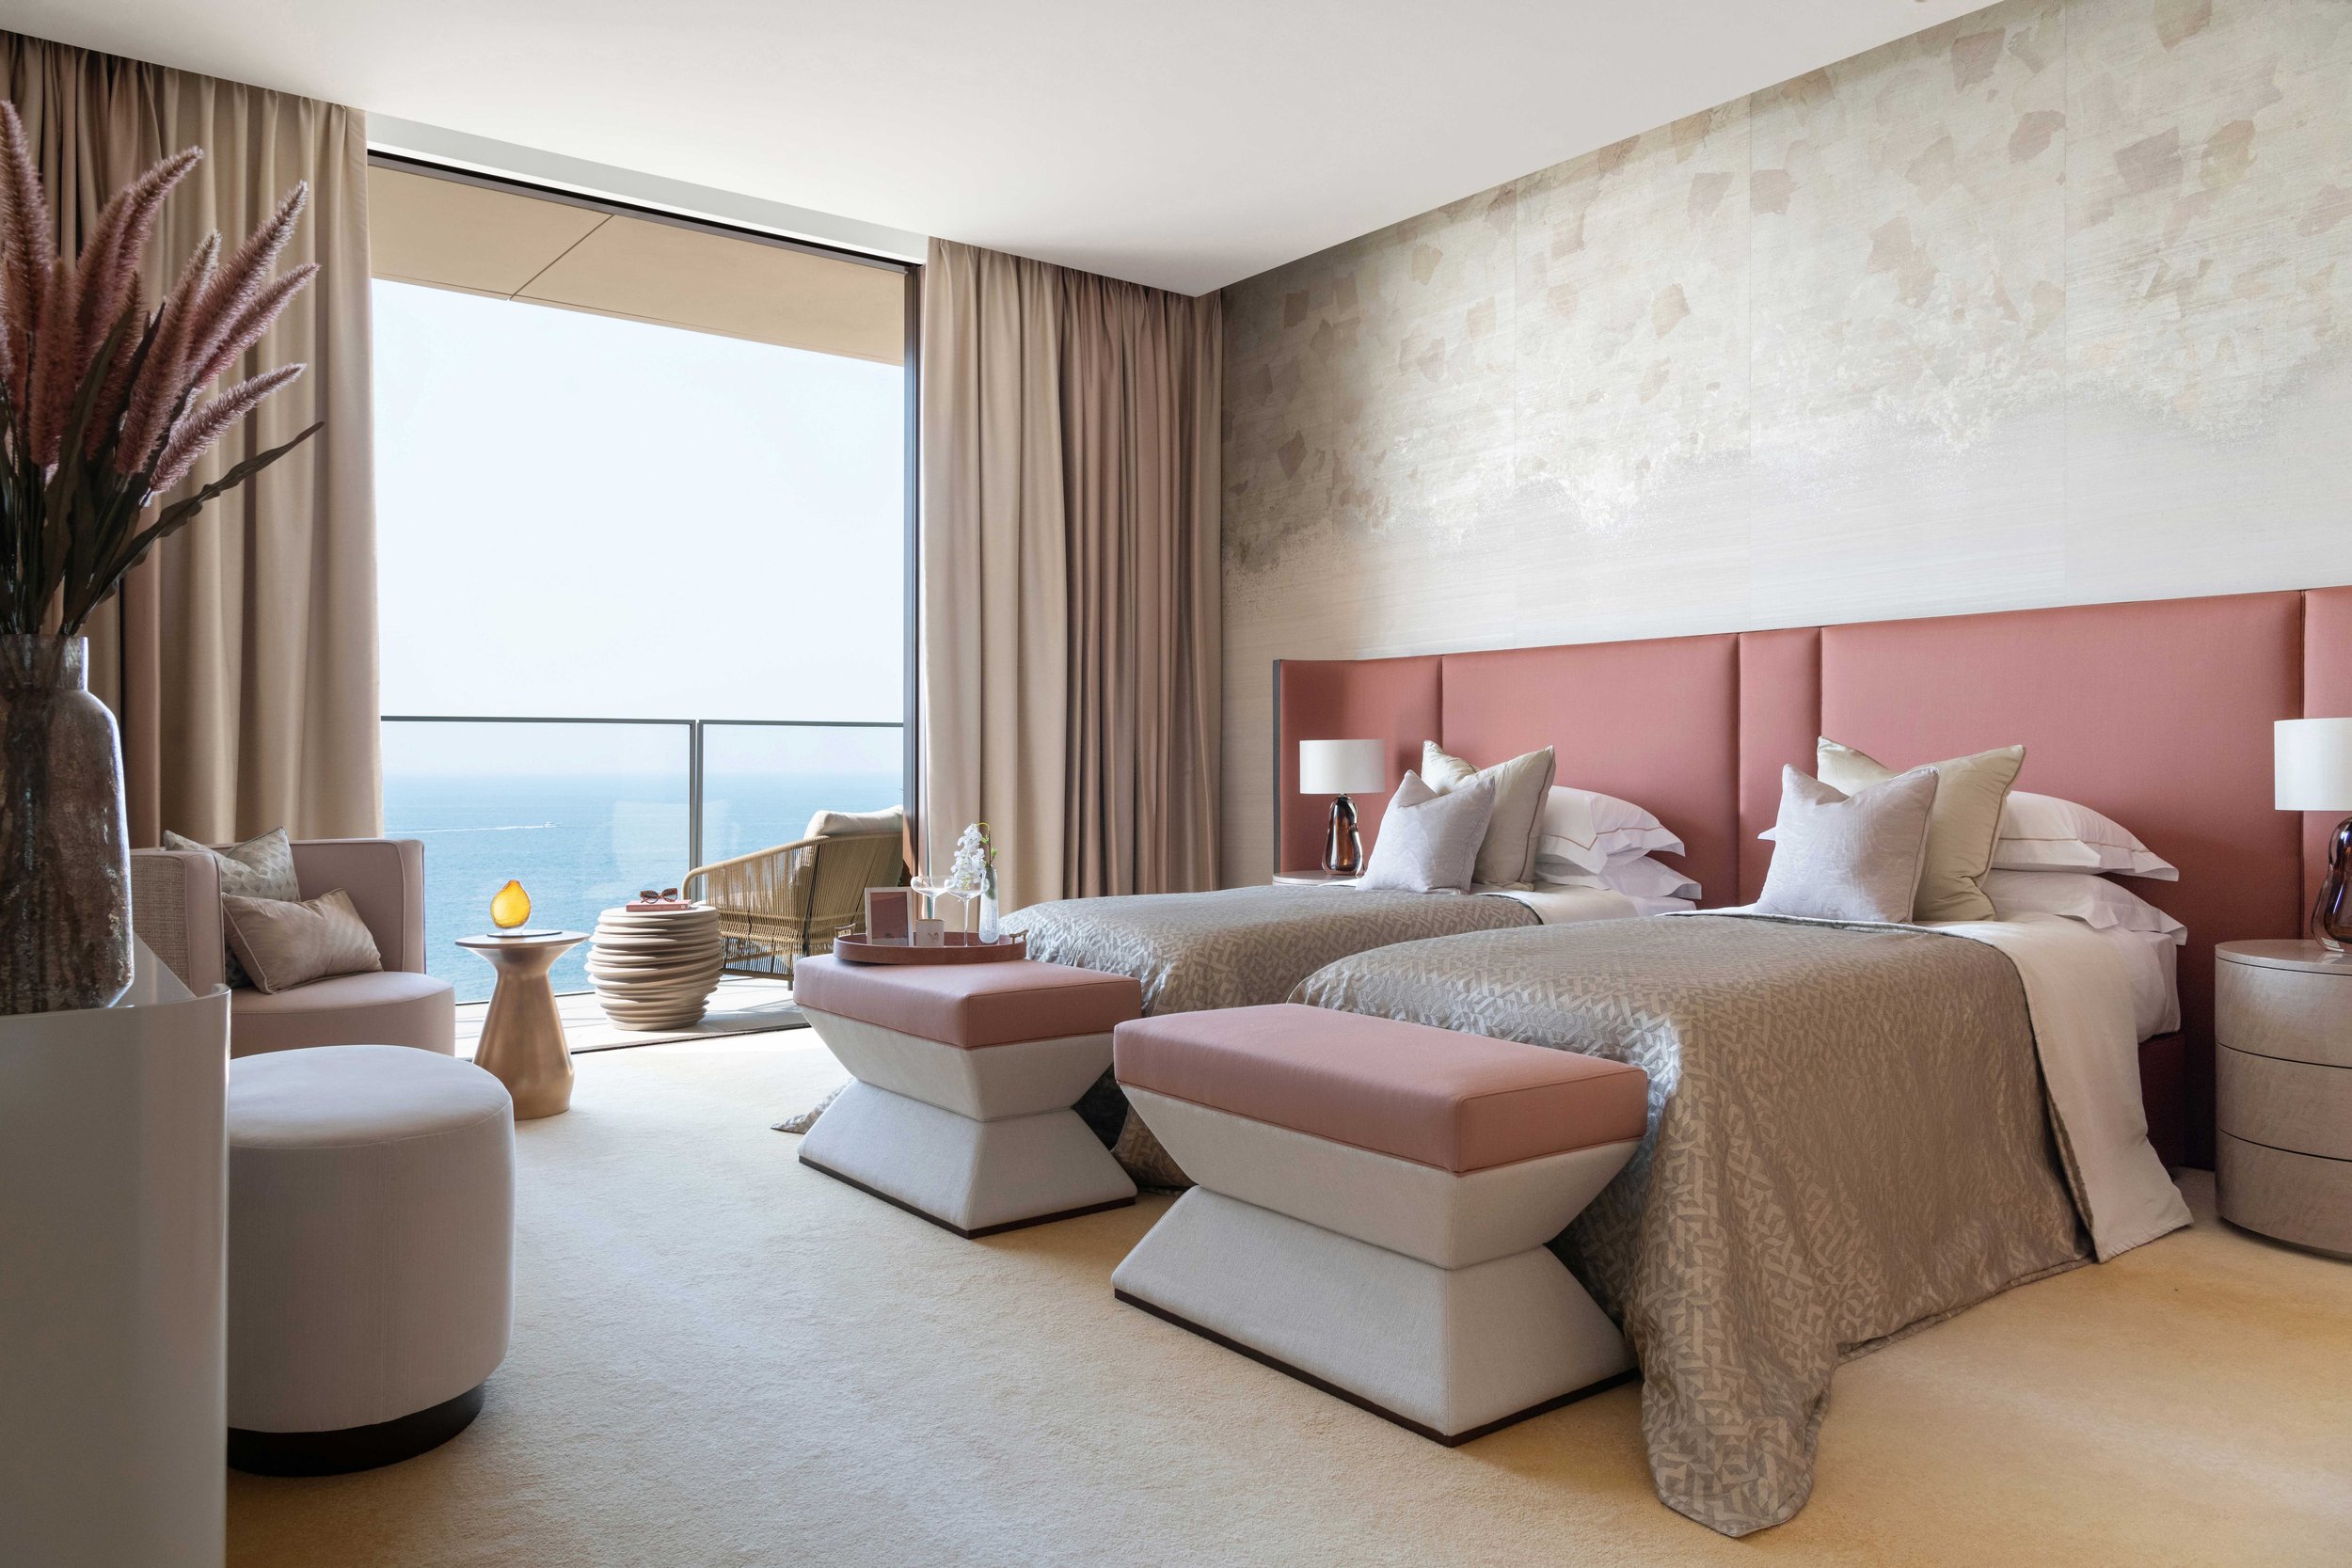 accouter_atlantis_the_royal_residences_guest_bedroom_2_032.jpg